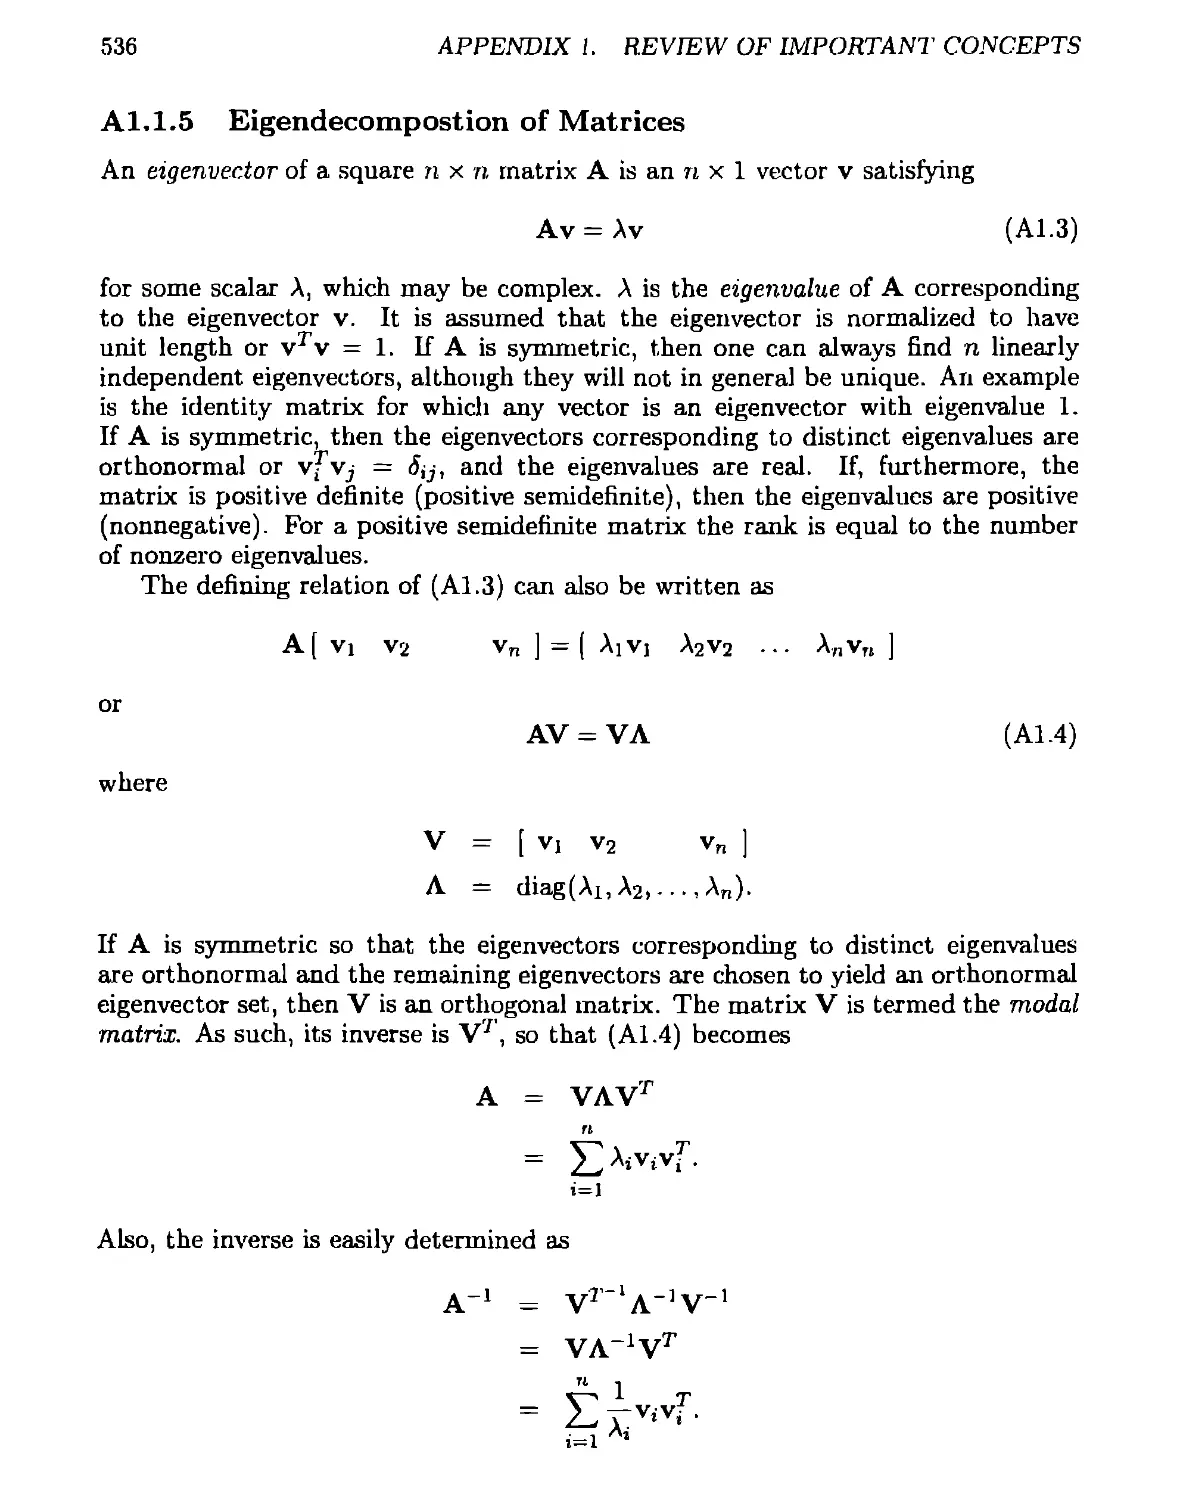 A.1.1.5 Eigendecomposition of Matrices